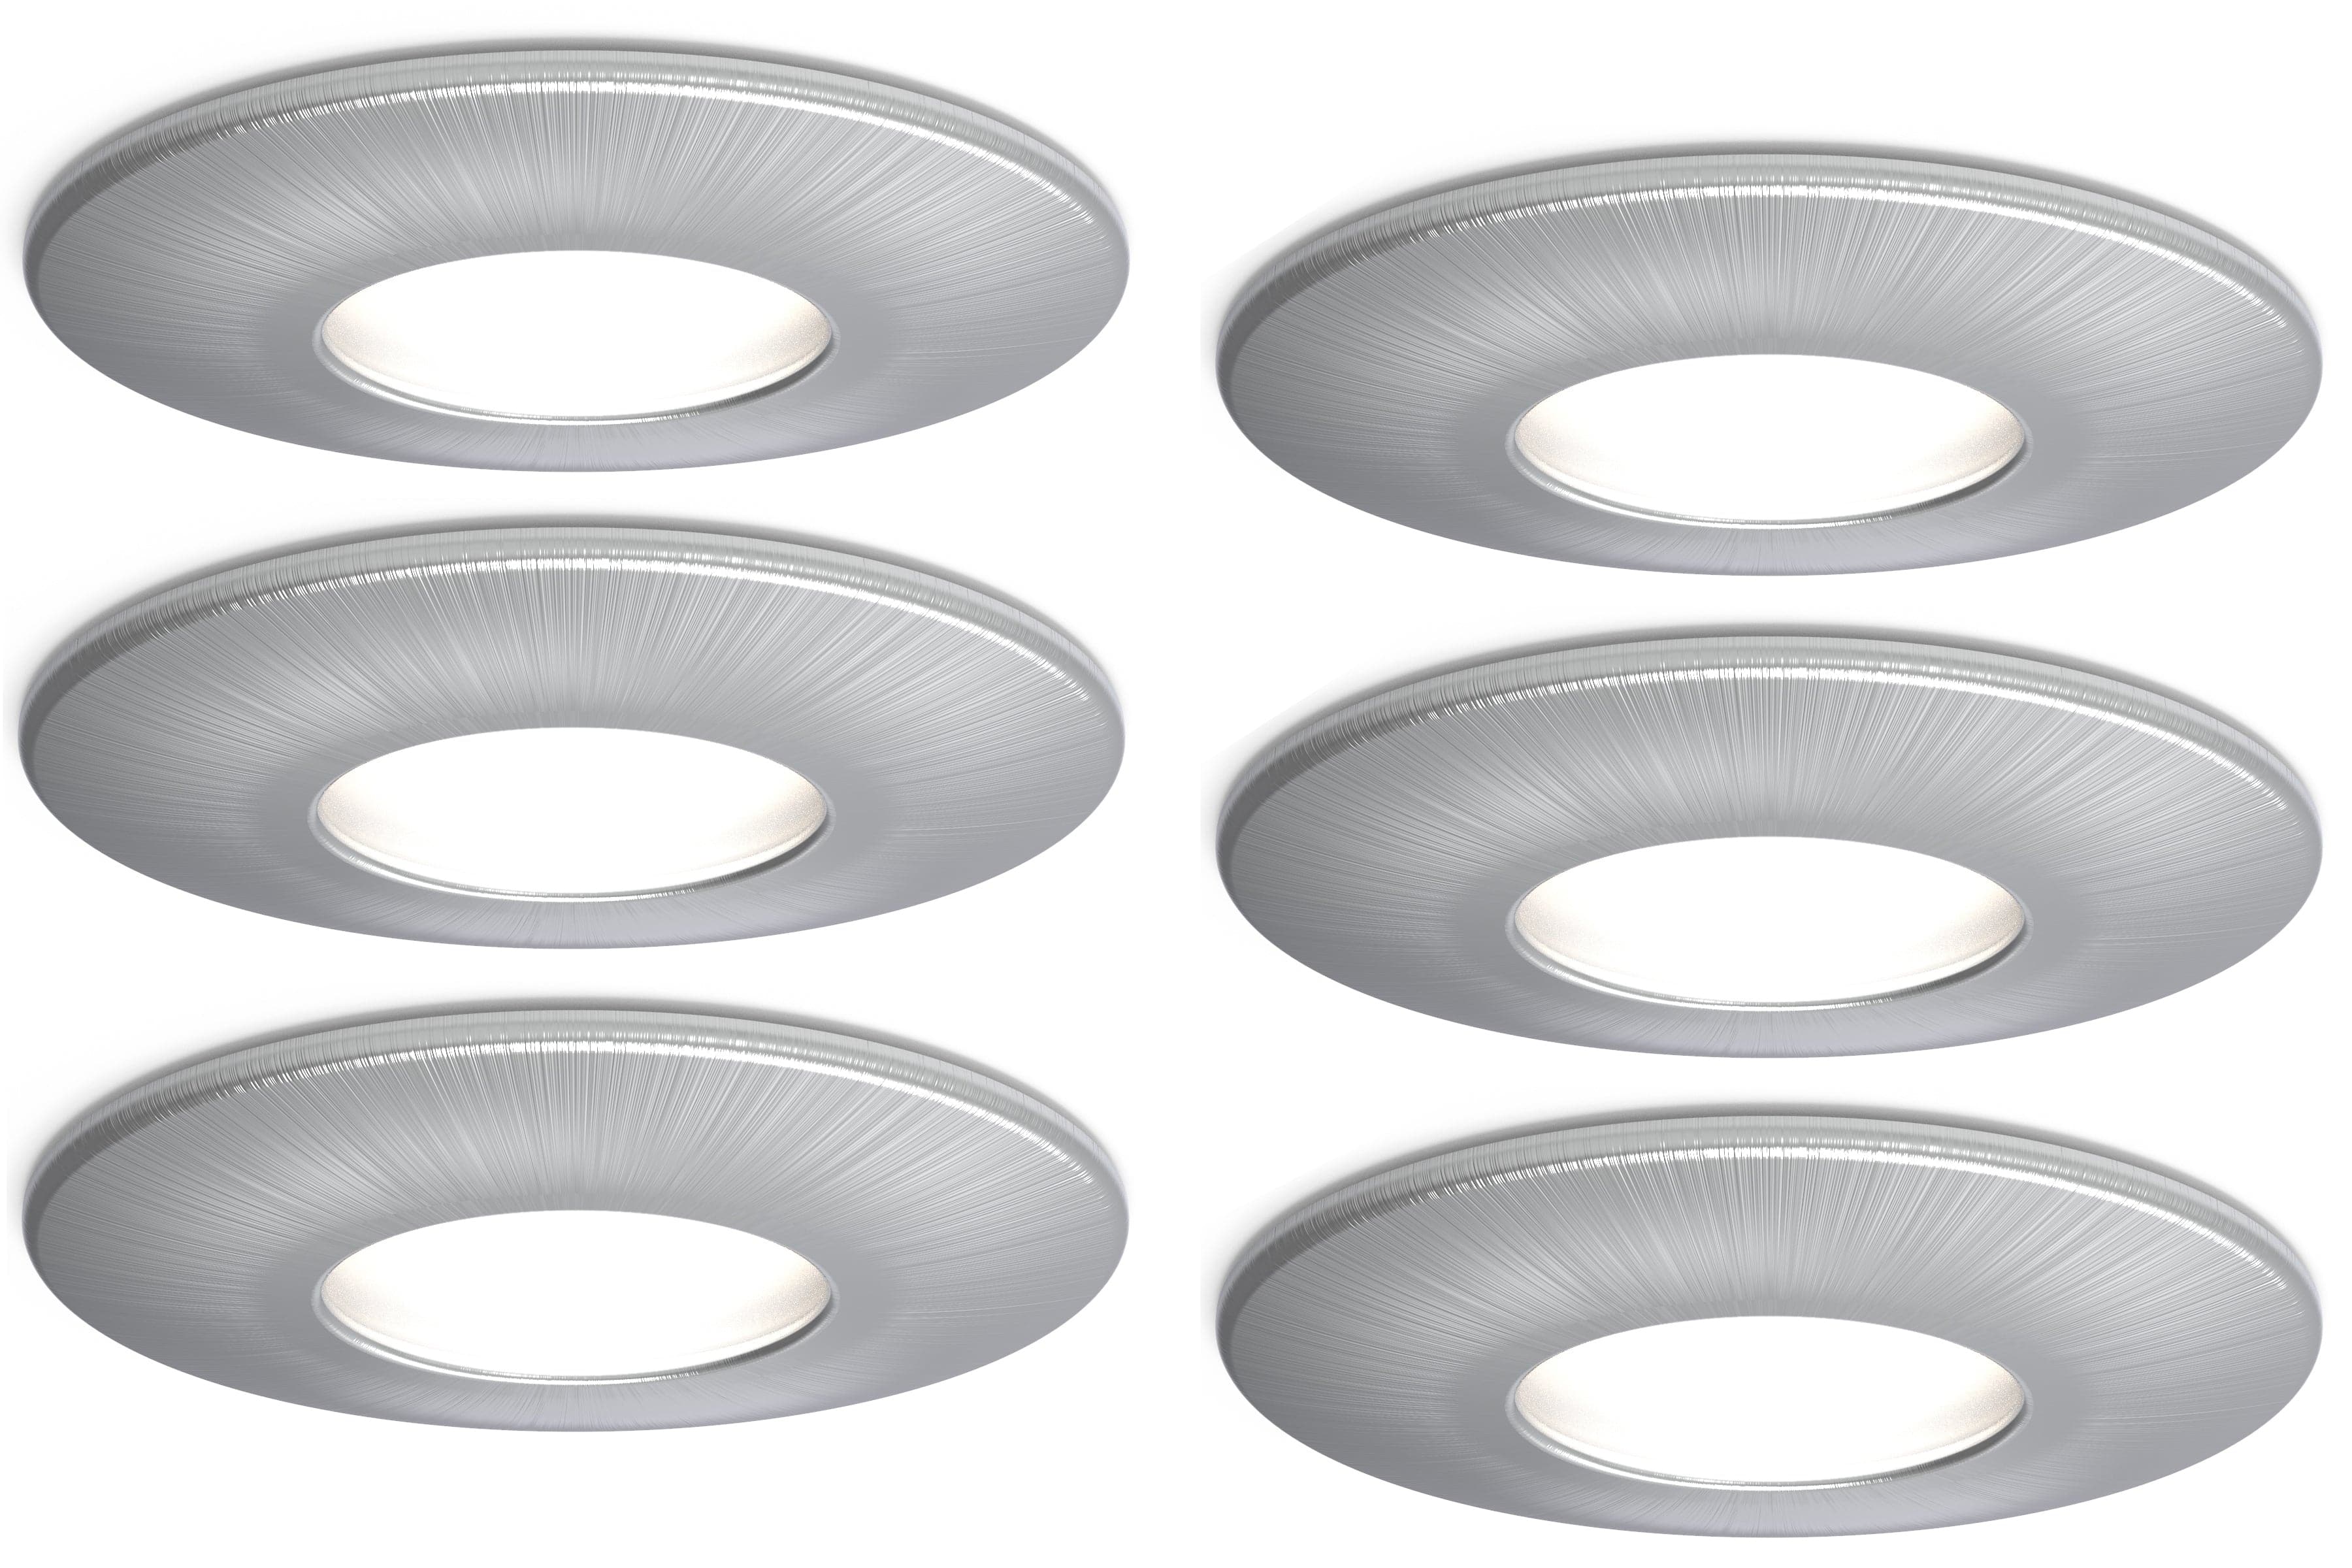 4lite IP65 GU10 Fire-Rated Downlight - Satin Chrome (Pack of 6)